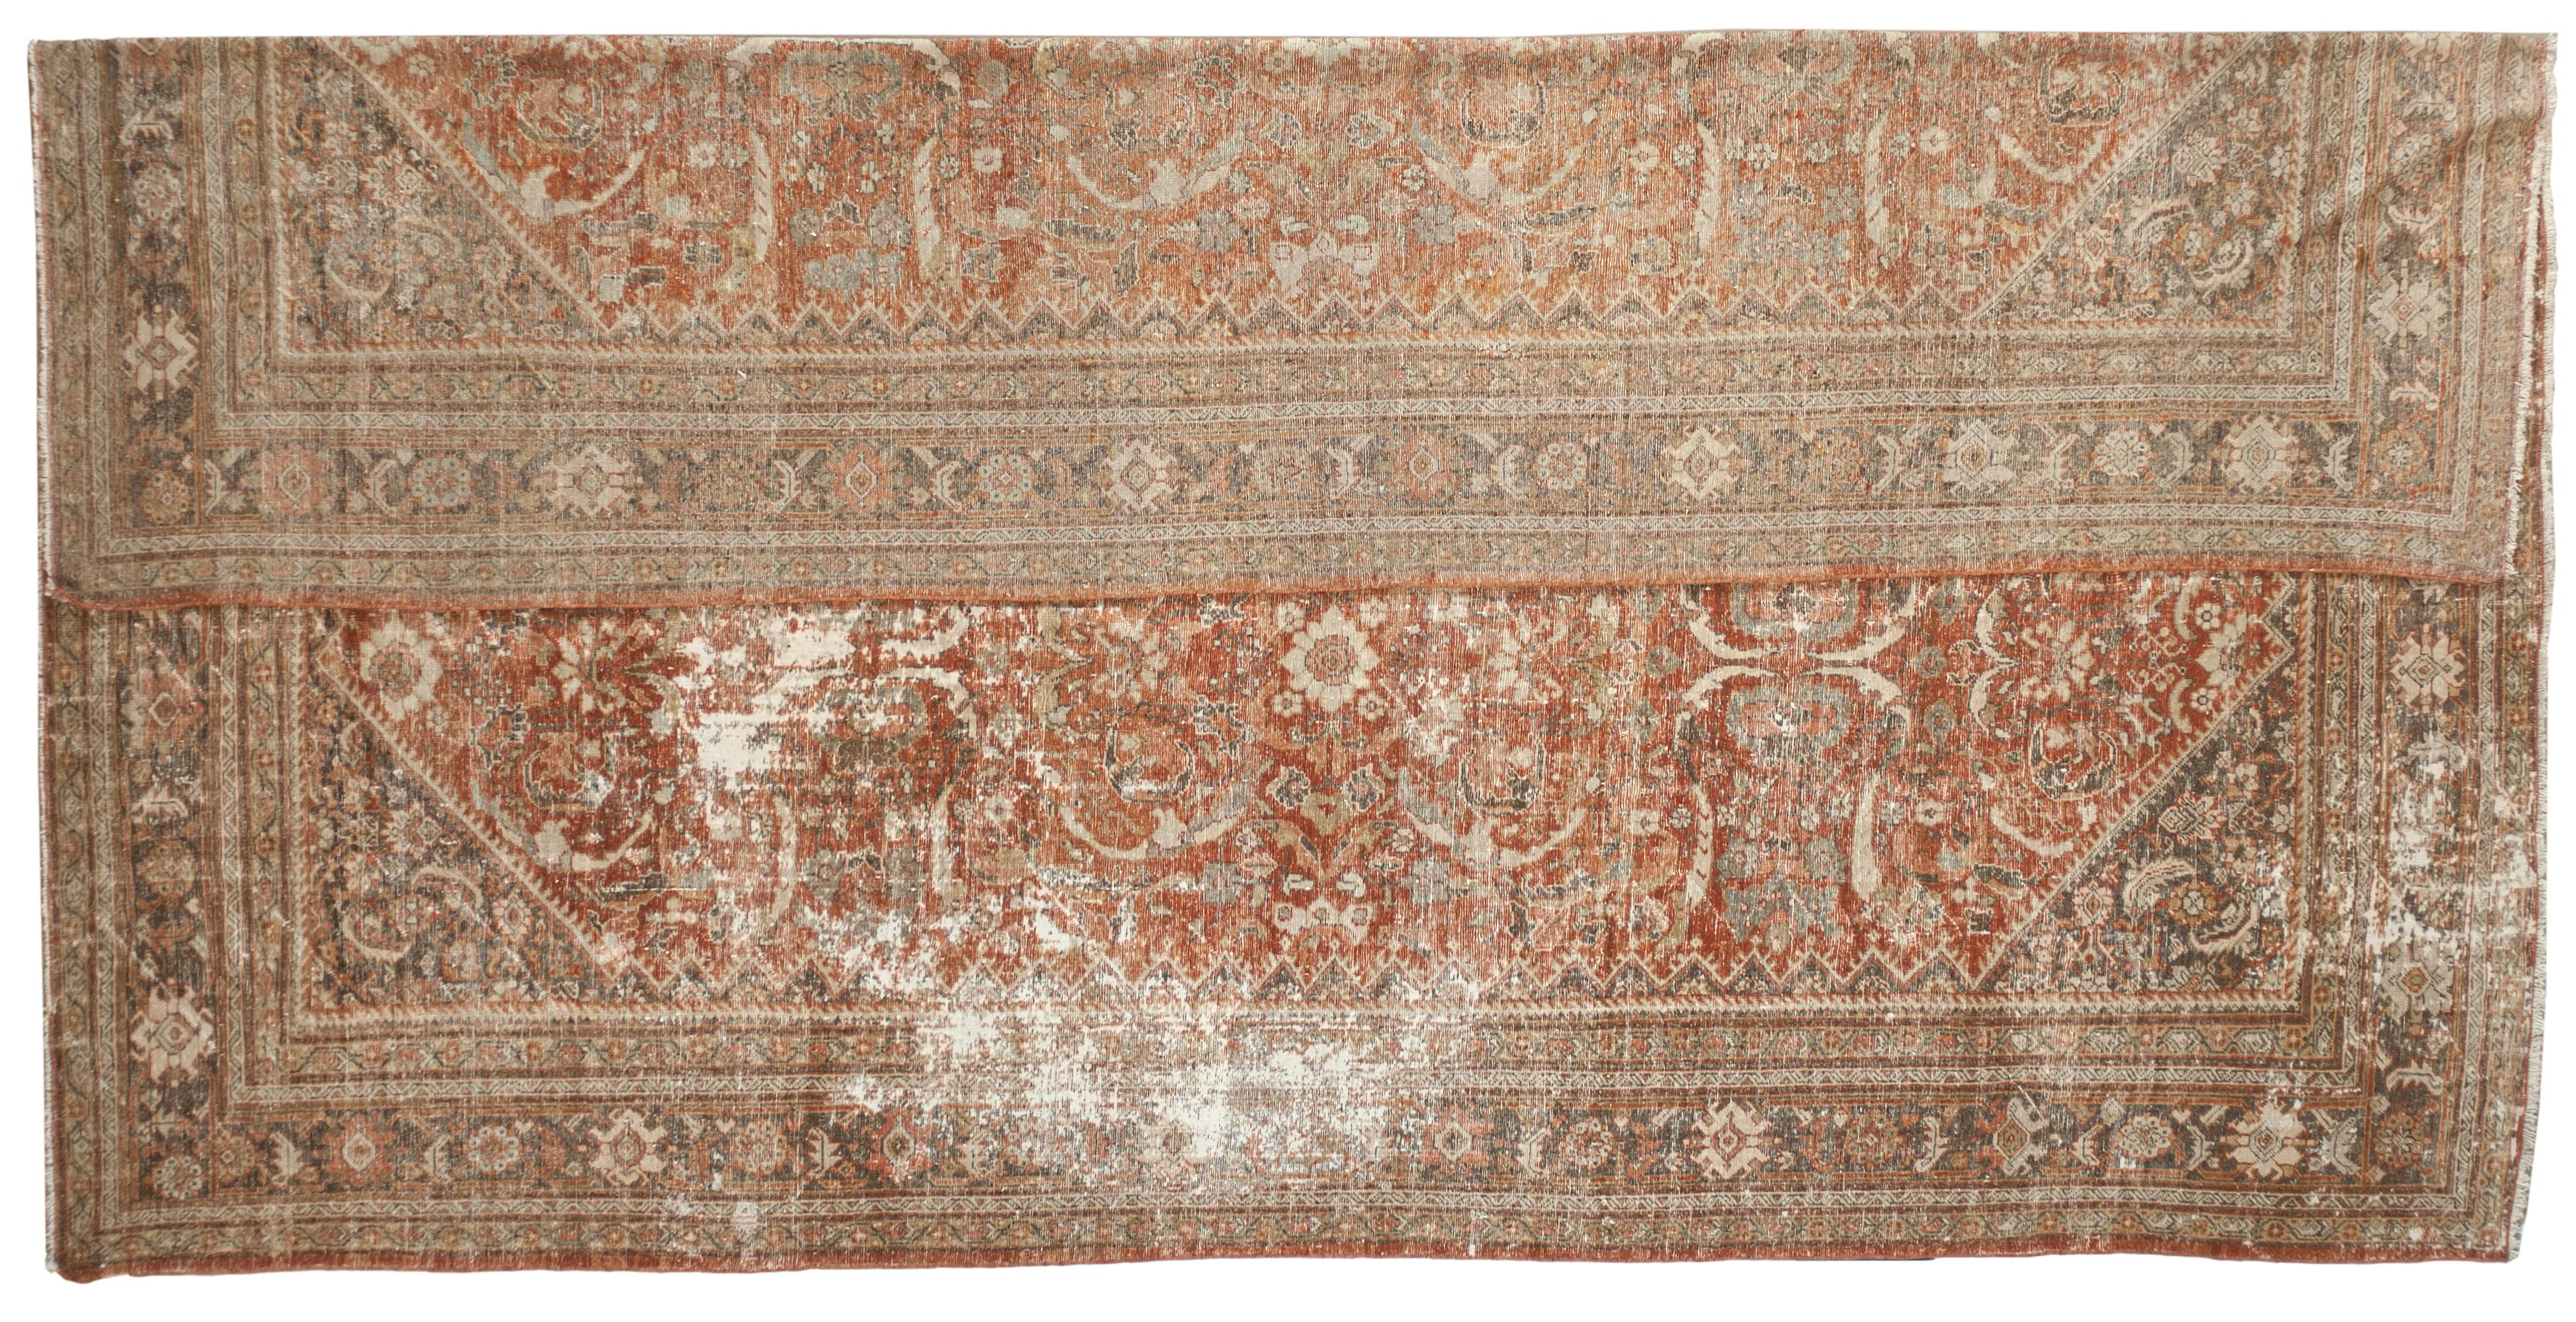 This Antique Distressed Mahal is an all wool Handmade and Hand knotted rug. It has an all over design from the 20th century and was made in Iran. The name is derived from the Mahallat village where the rugs were crafted, and they are characterized